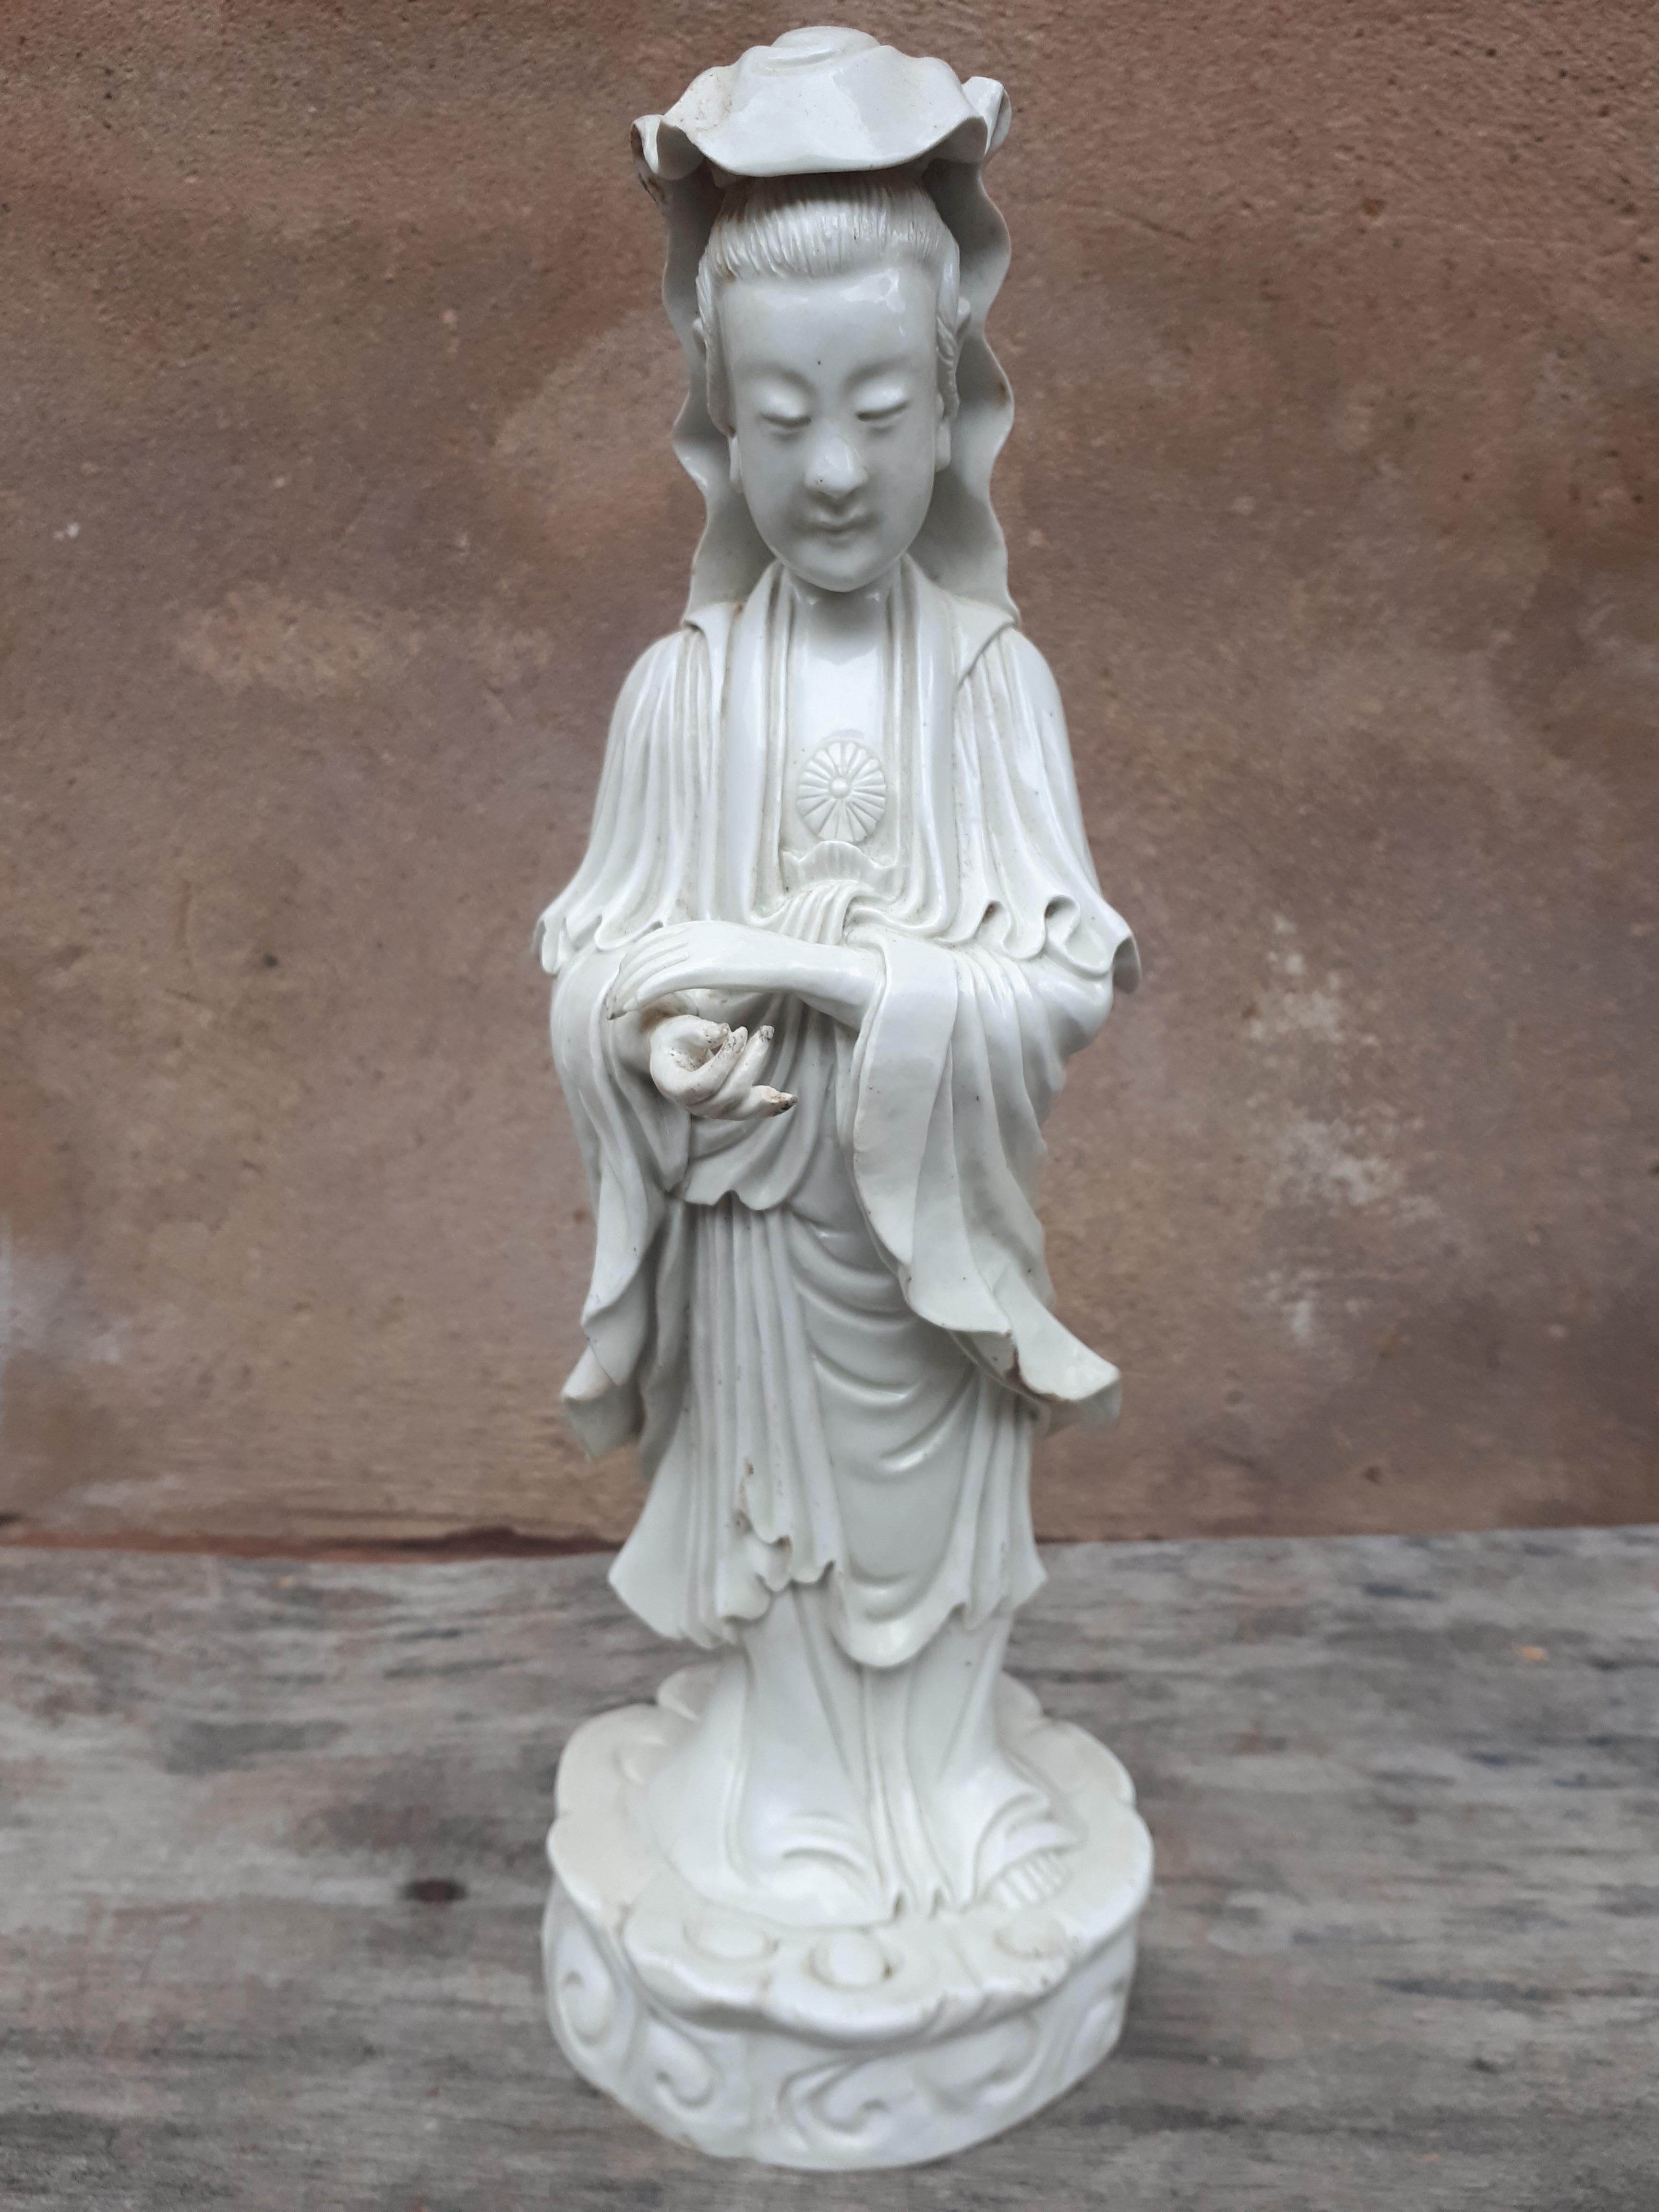 Porcelain statue of Guanyin.
A few chips, notably to two fingers of the right hand, do not detract from the aesthetics of the whole.
China, 19th century.